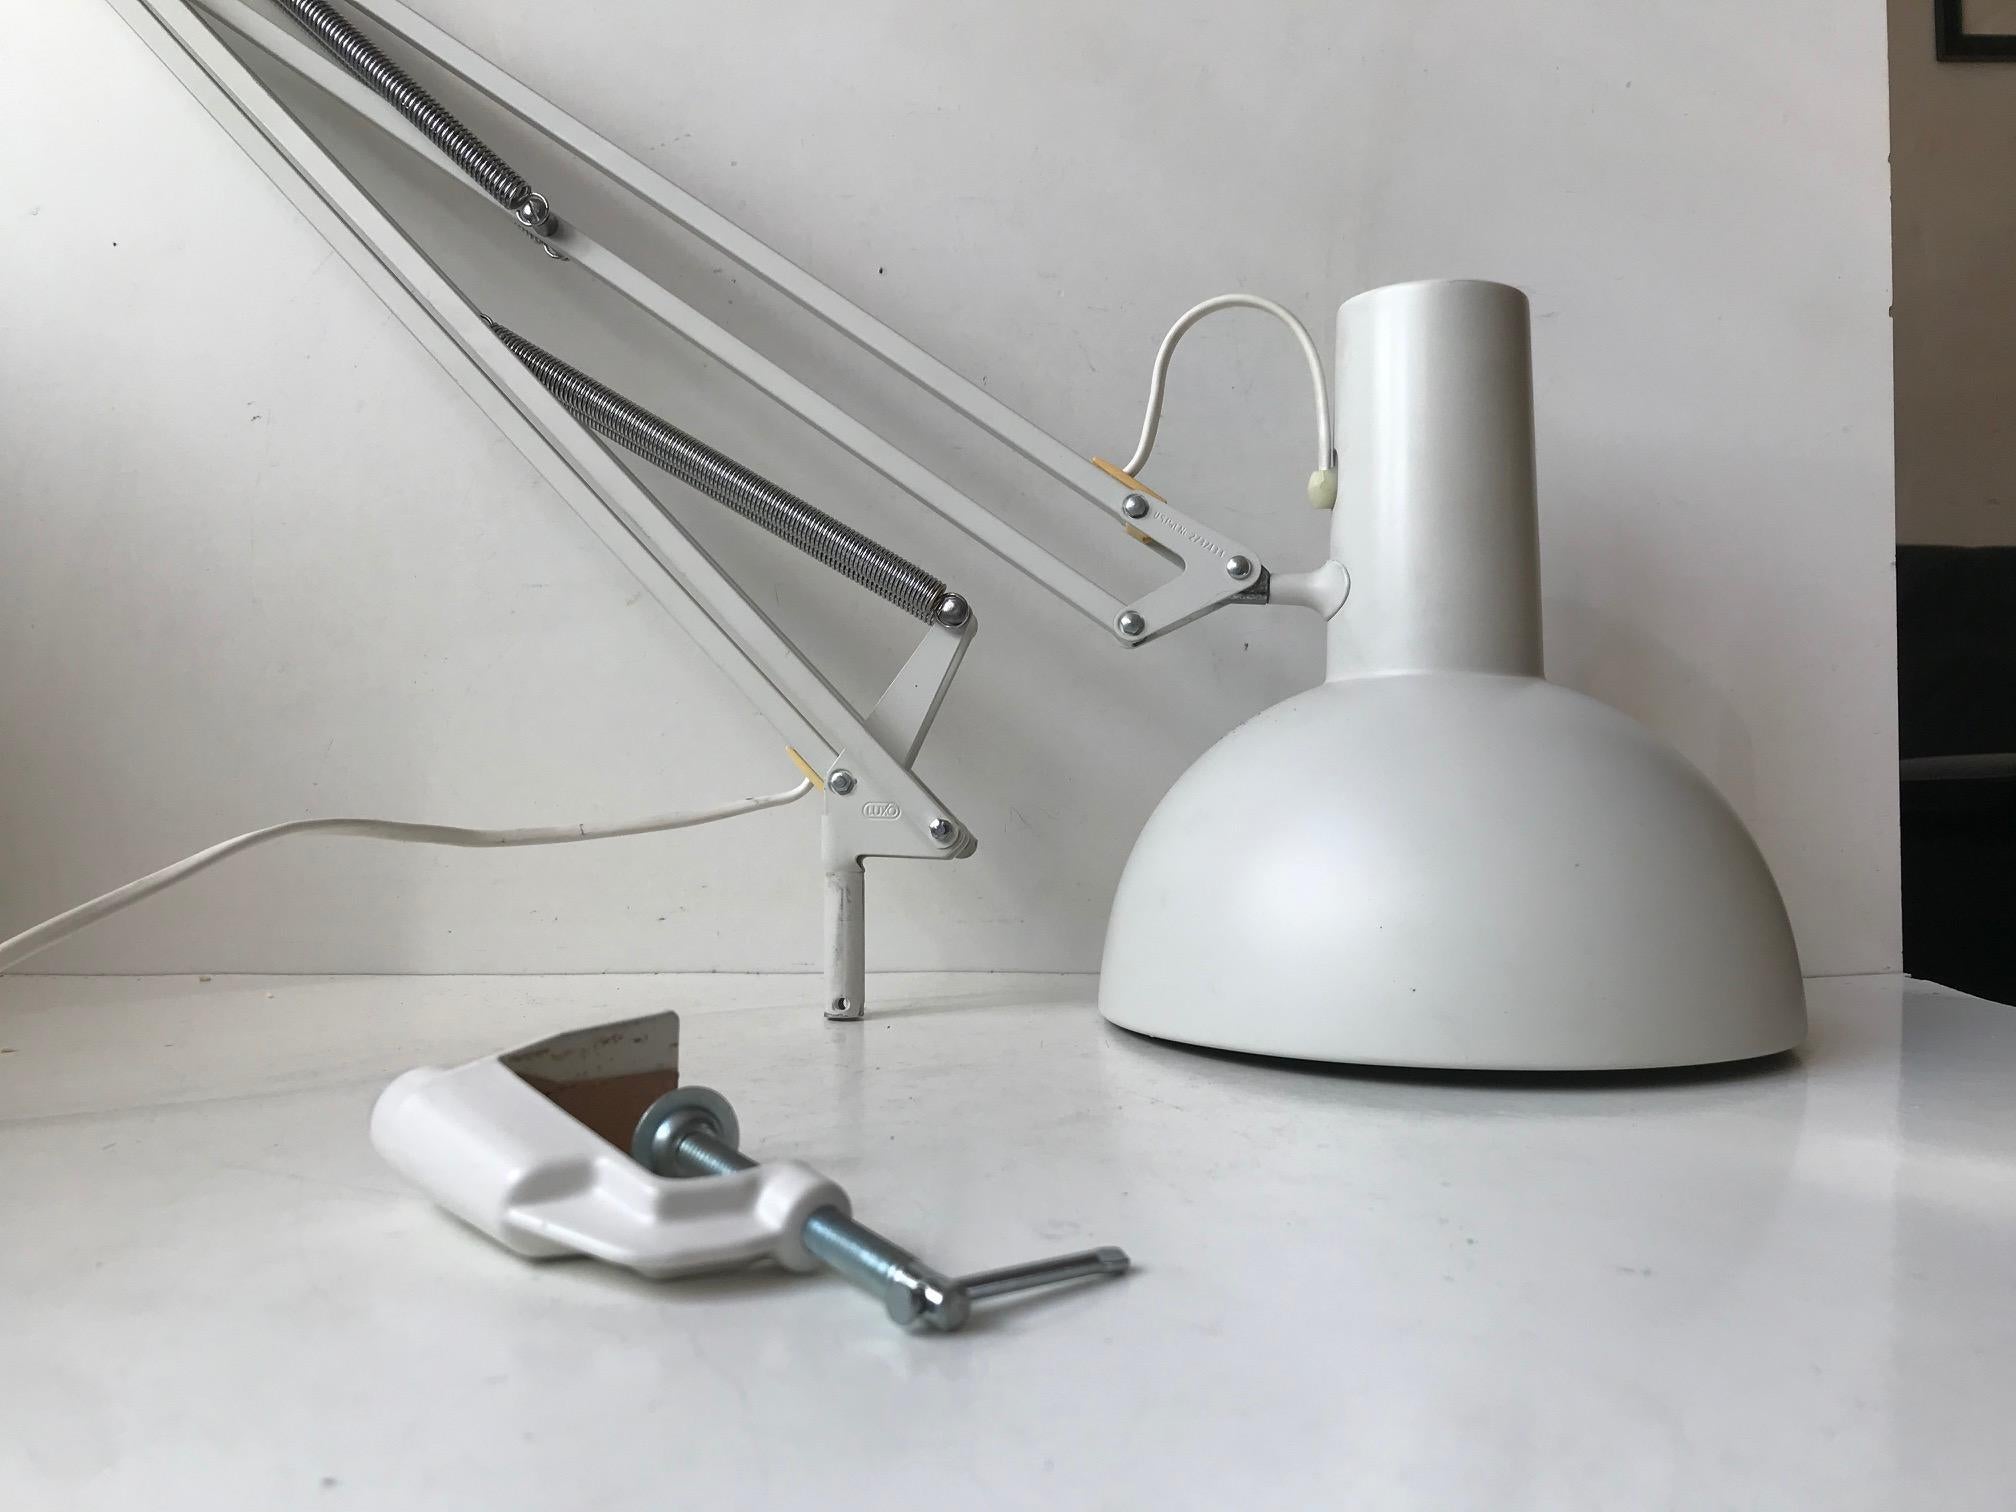 Often referred to as 'The Ghost of PH' and based on the Ideas of Poul Henningsen this fully adjustable white 'Anglepoise' desk light was designed in-house at Louis Poulsen in the early 1970s. This one is an dates from the 80s. It comes with LP